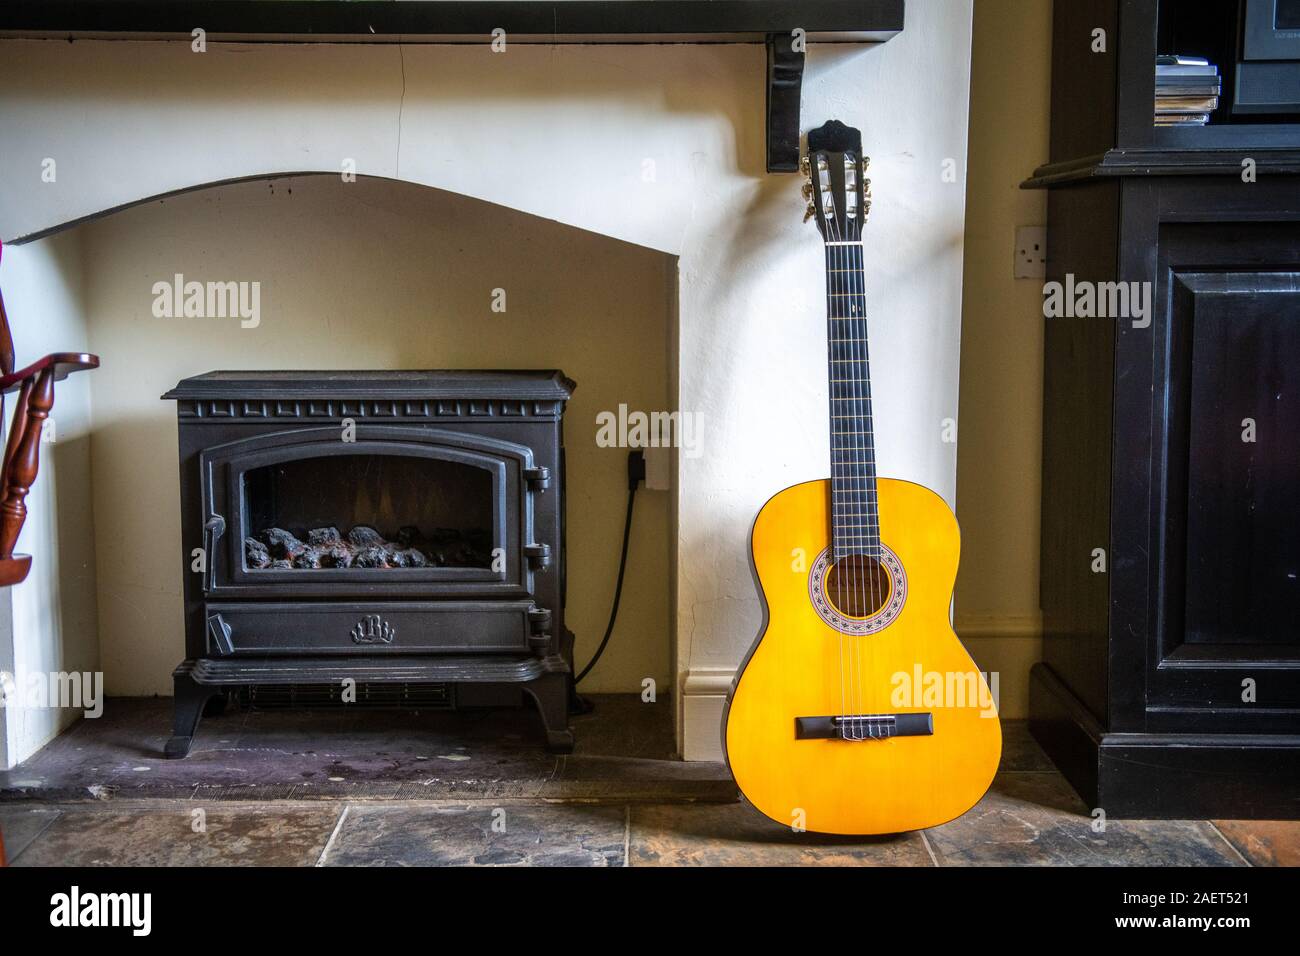 A guitar sits next to a furnace, Yorkshire, UK Stock Photo